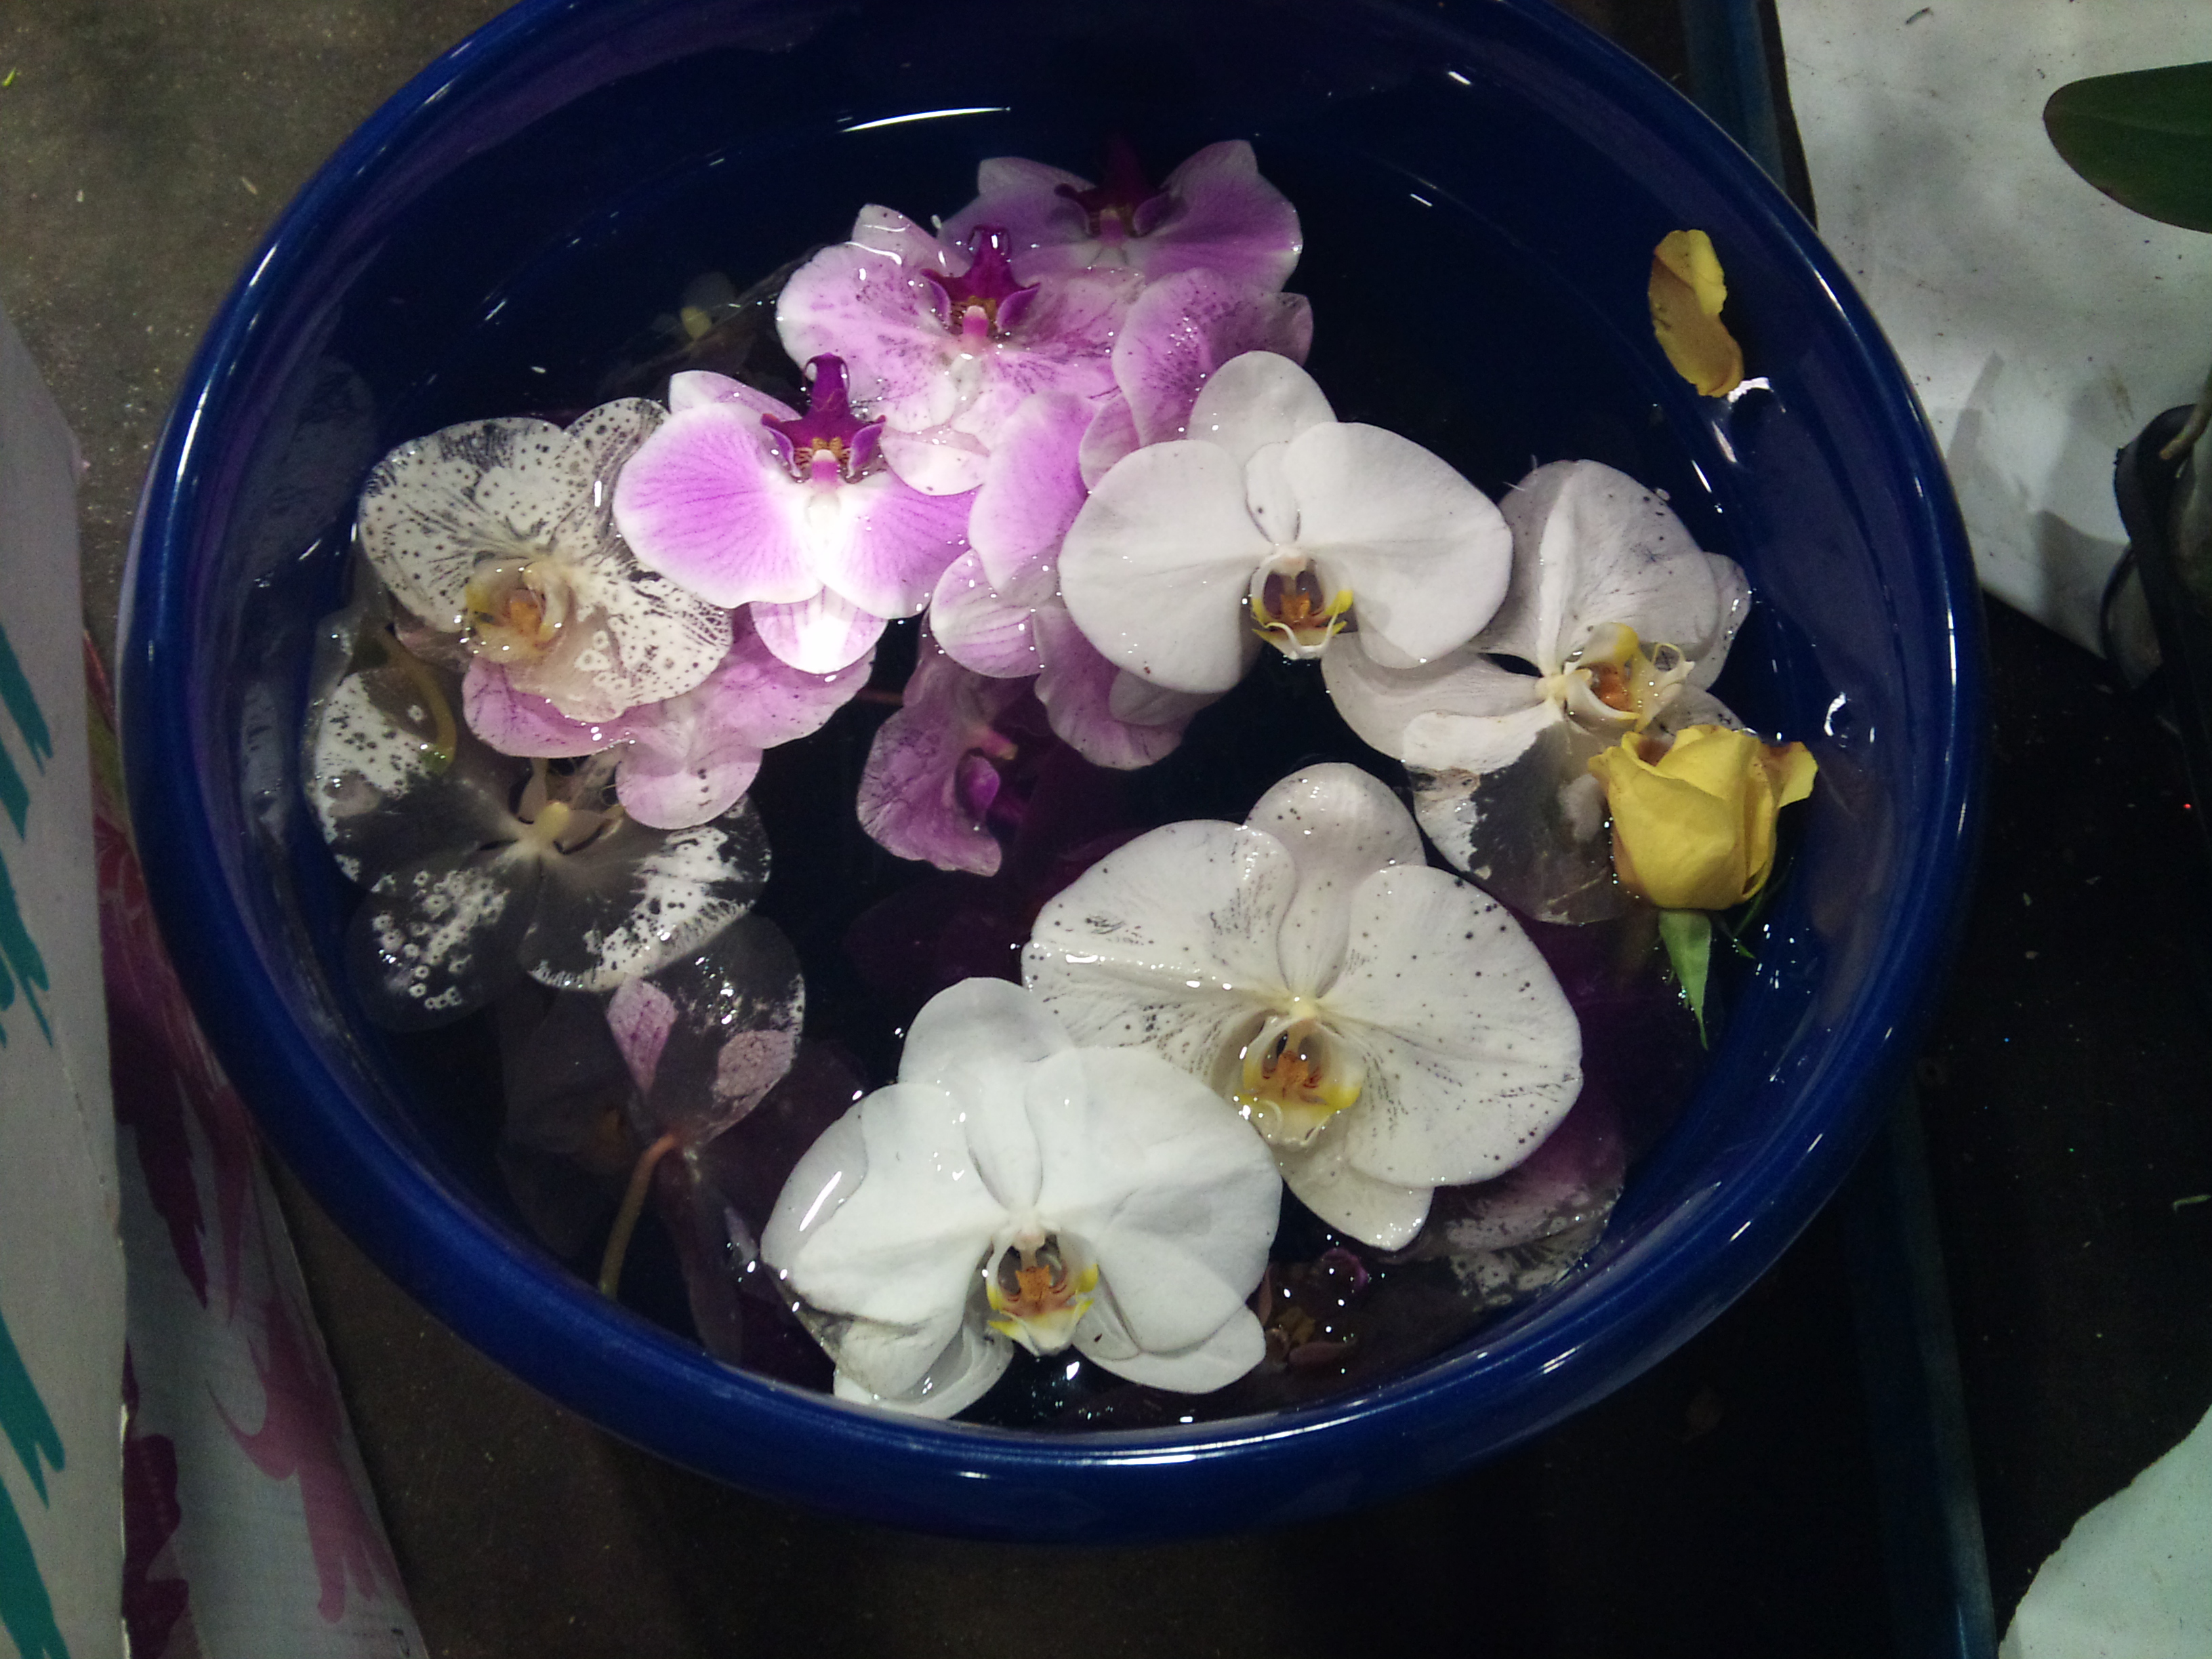 2012-11-orchid-spa.jpg?mtime=20171003160401#asset:12699